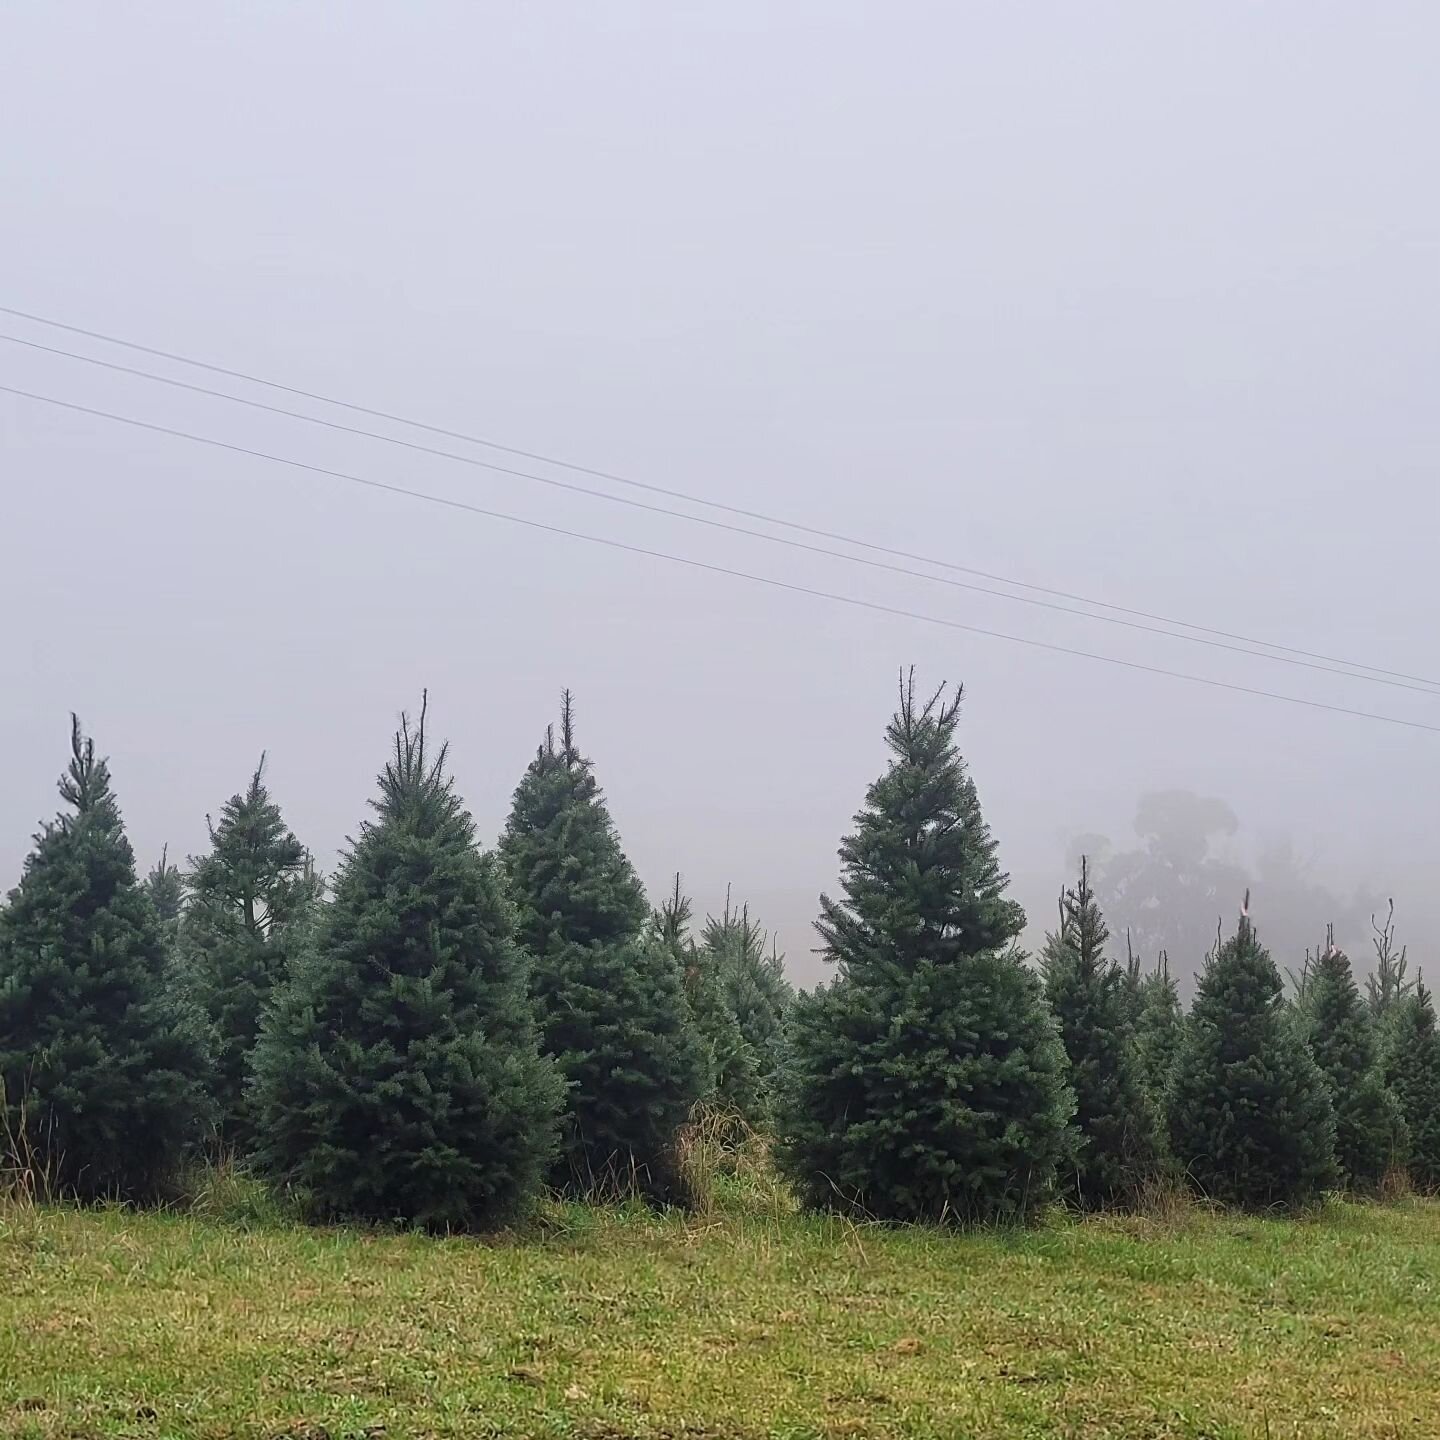 Some welcome rain today and some happy trees! #spruceupyourchristmas #localbusiness #farminglife